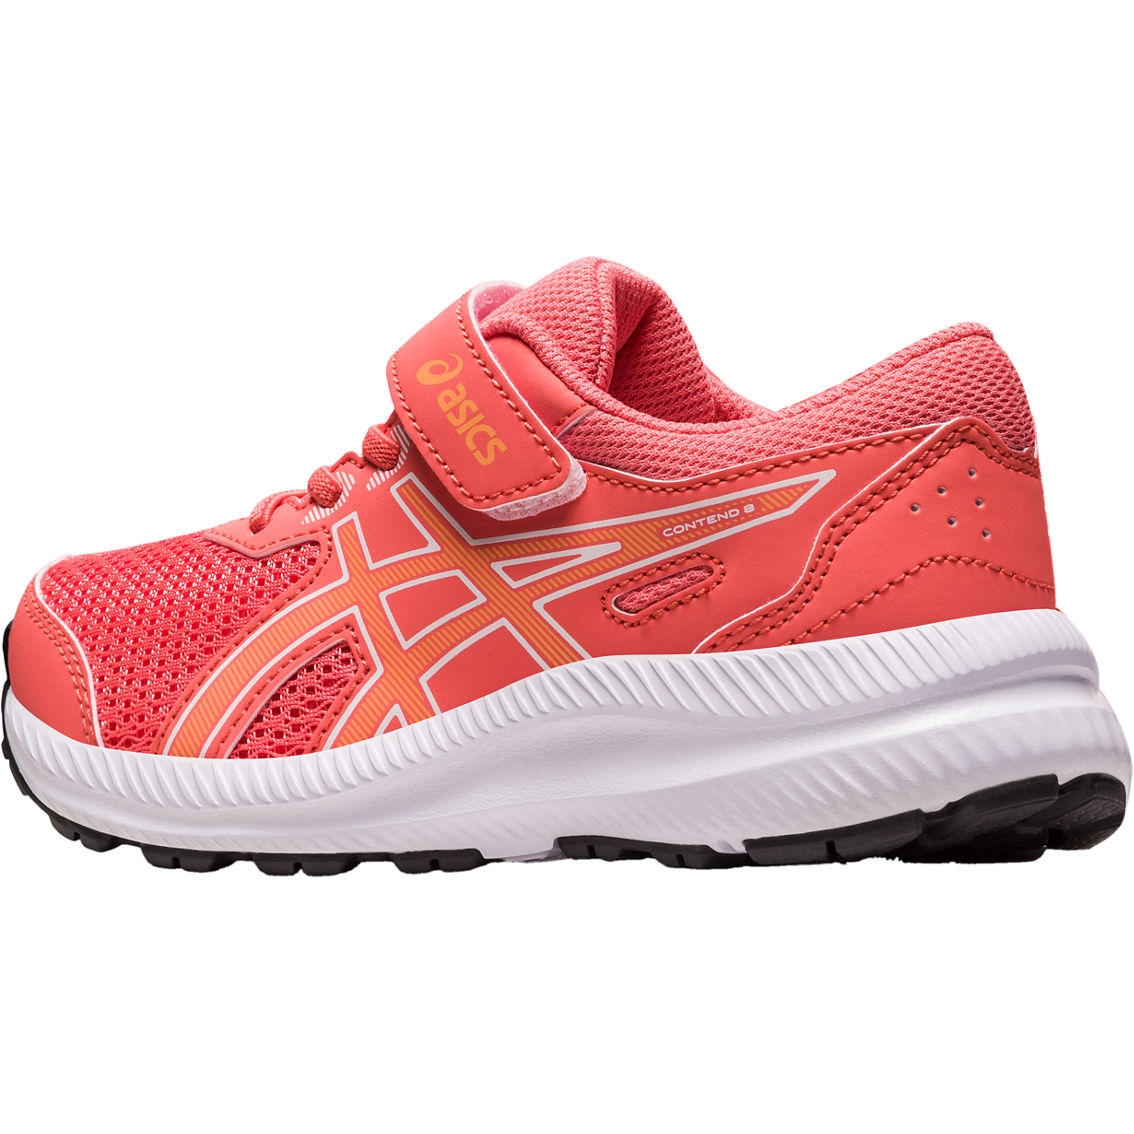 ASICS Preschool Girl's Contend 8 Shoes - Image 6 of 7